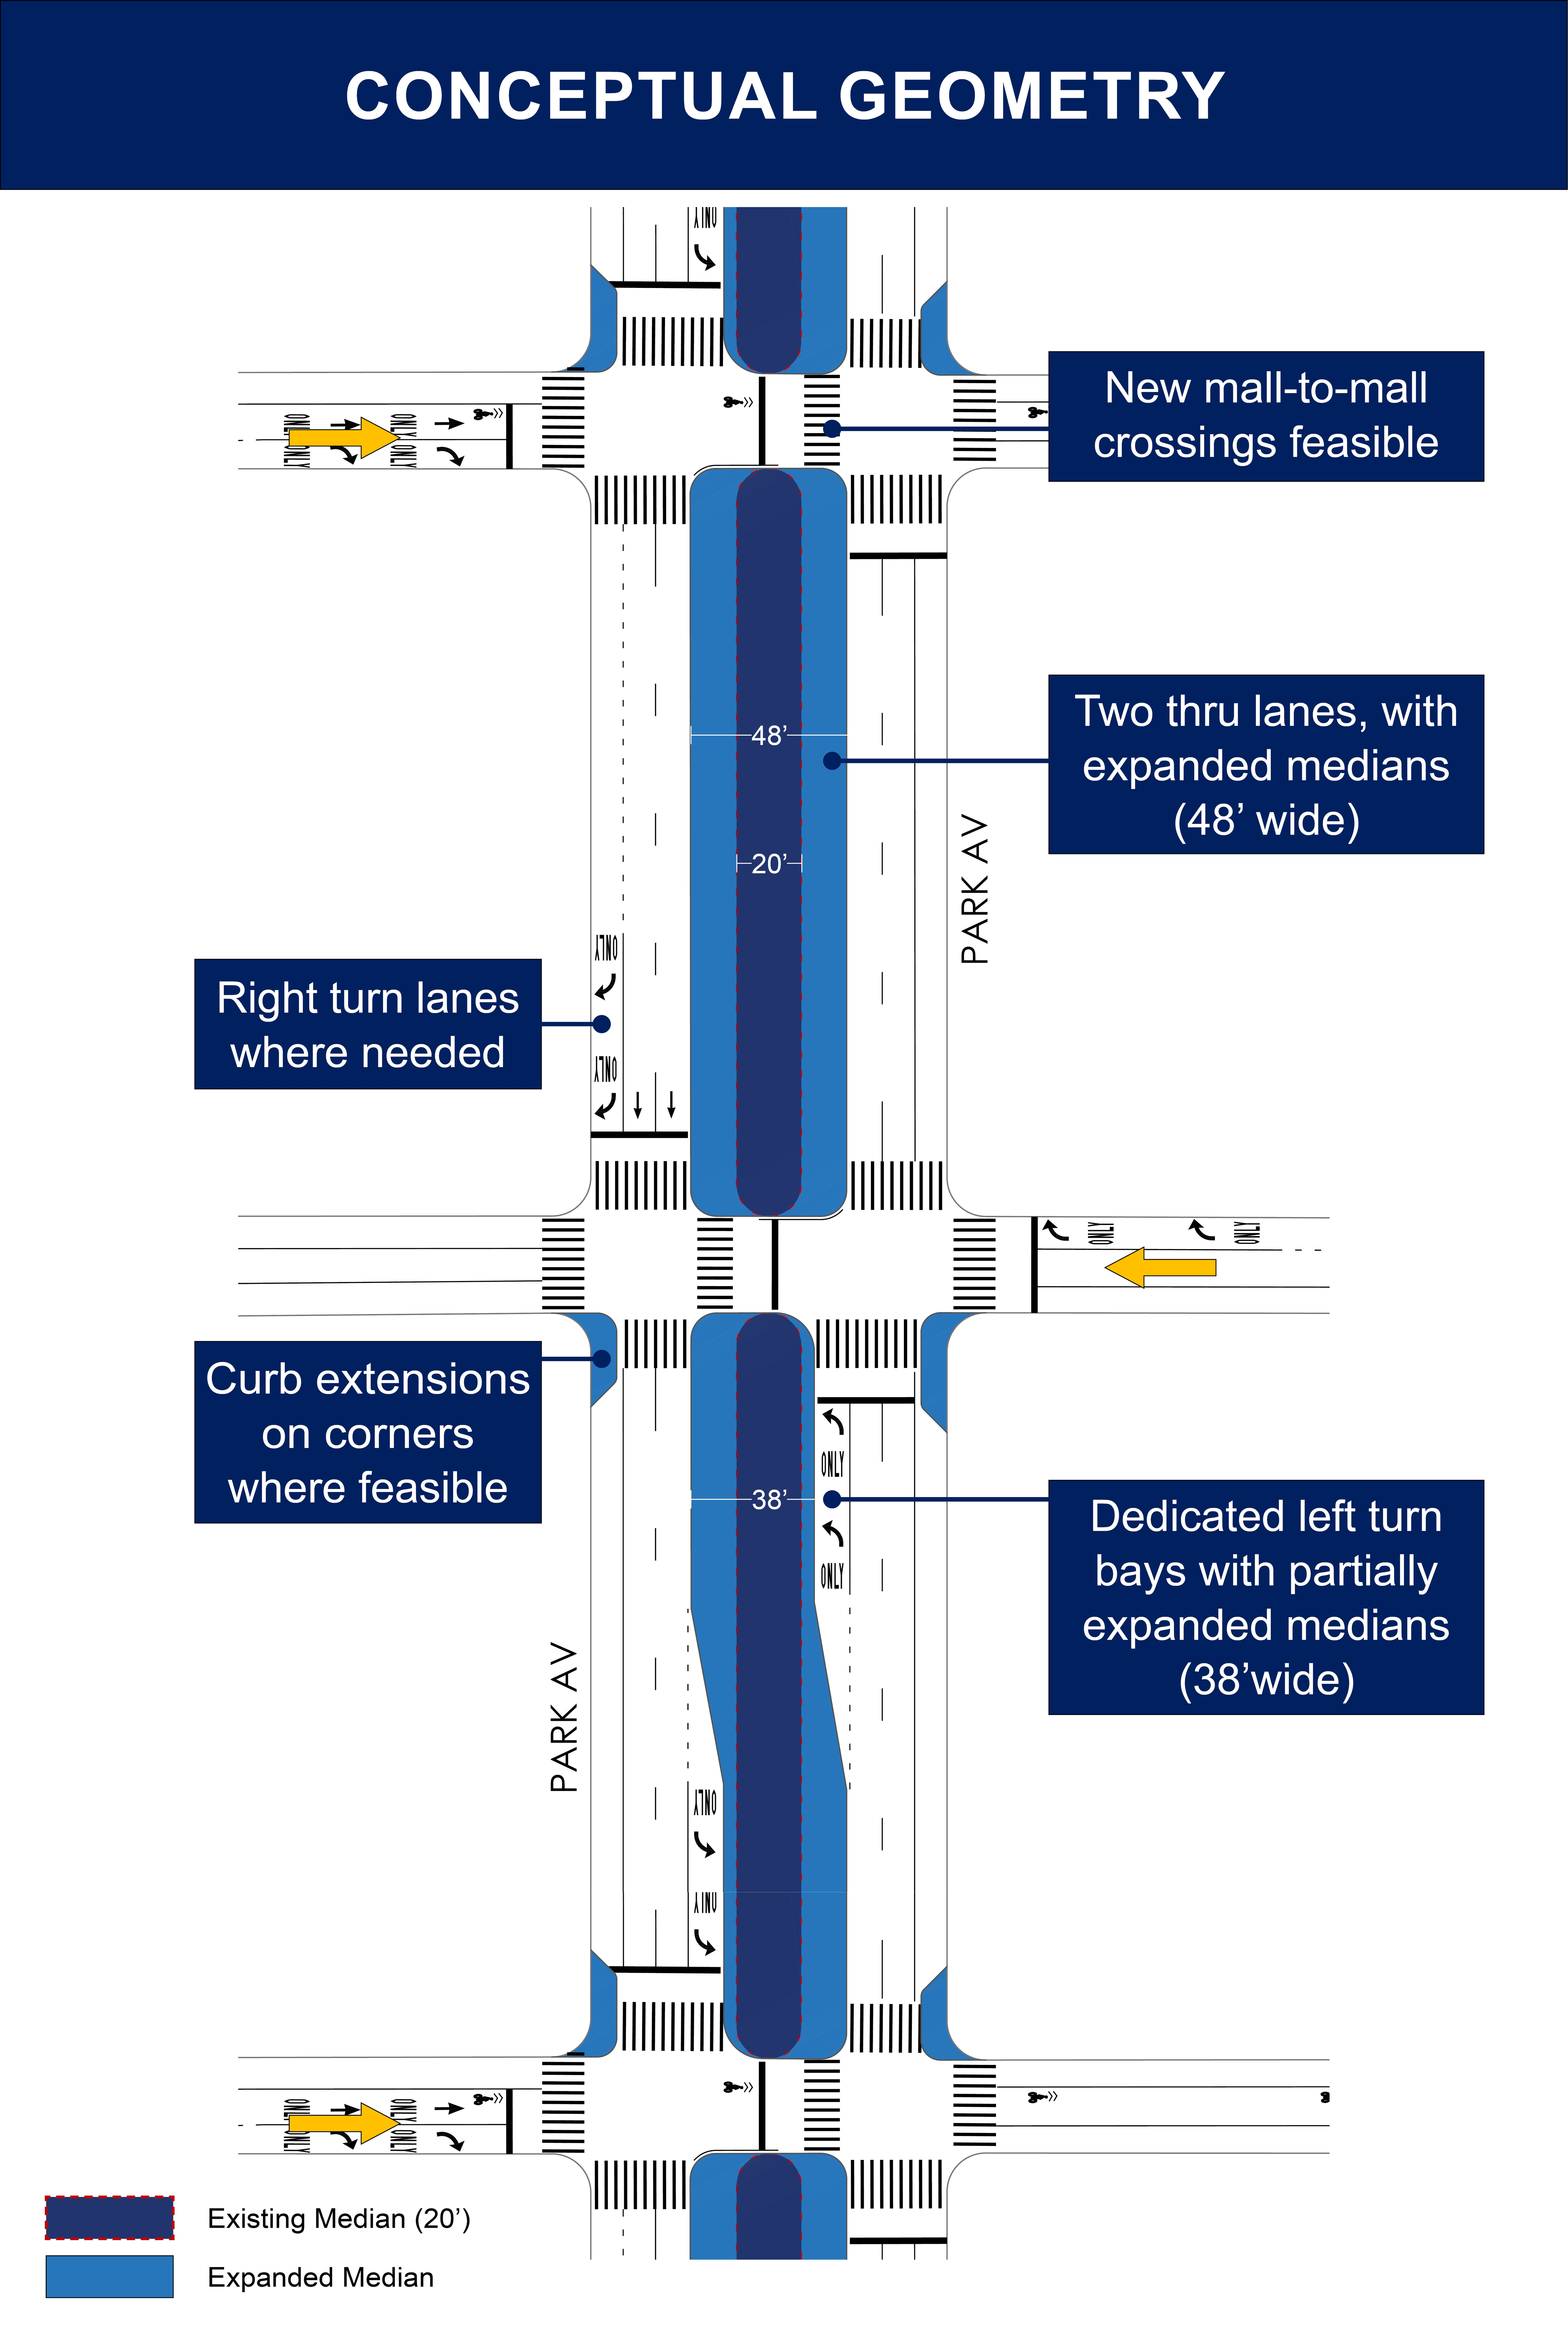 A diagram showing the conceptual geometry for Park Avenue, including wider medians and left turn lanes.